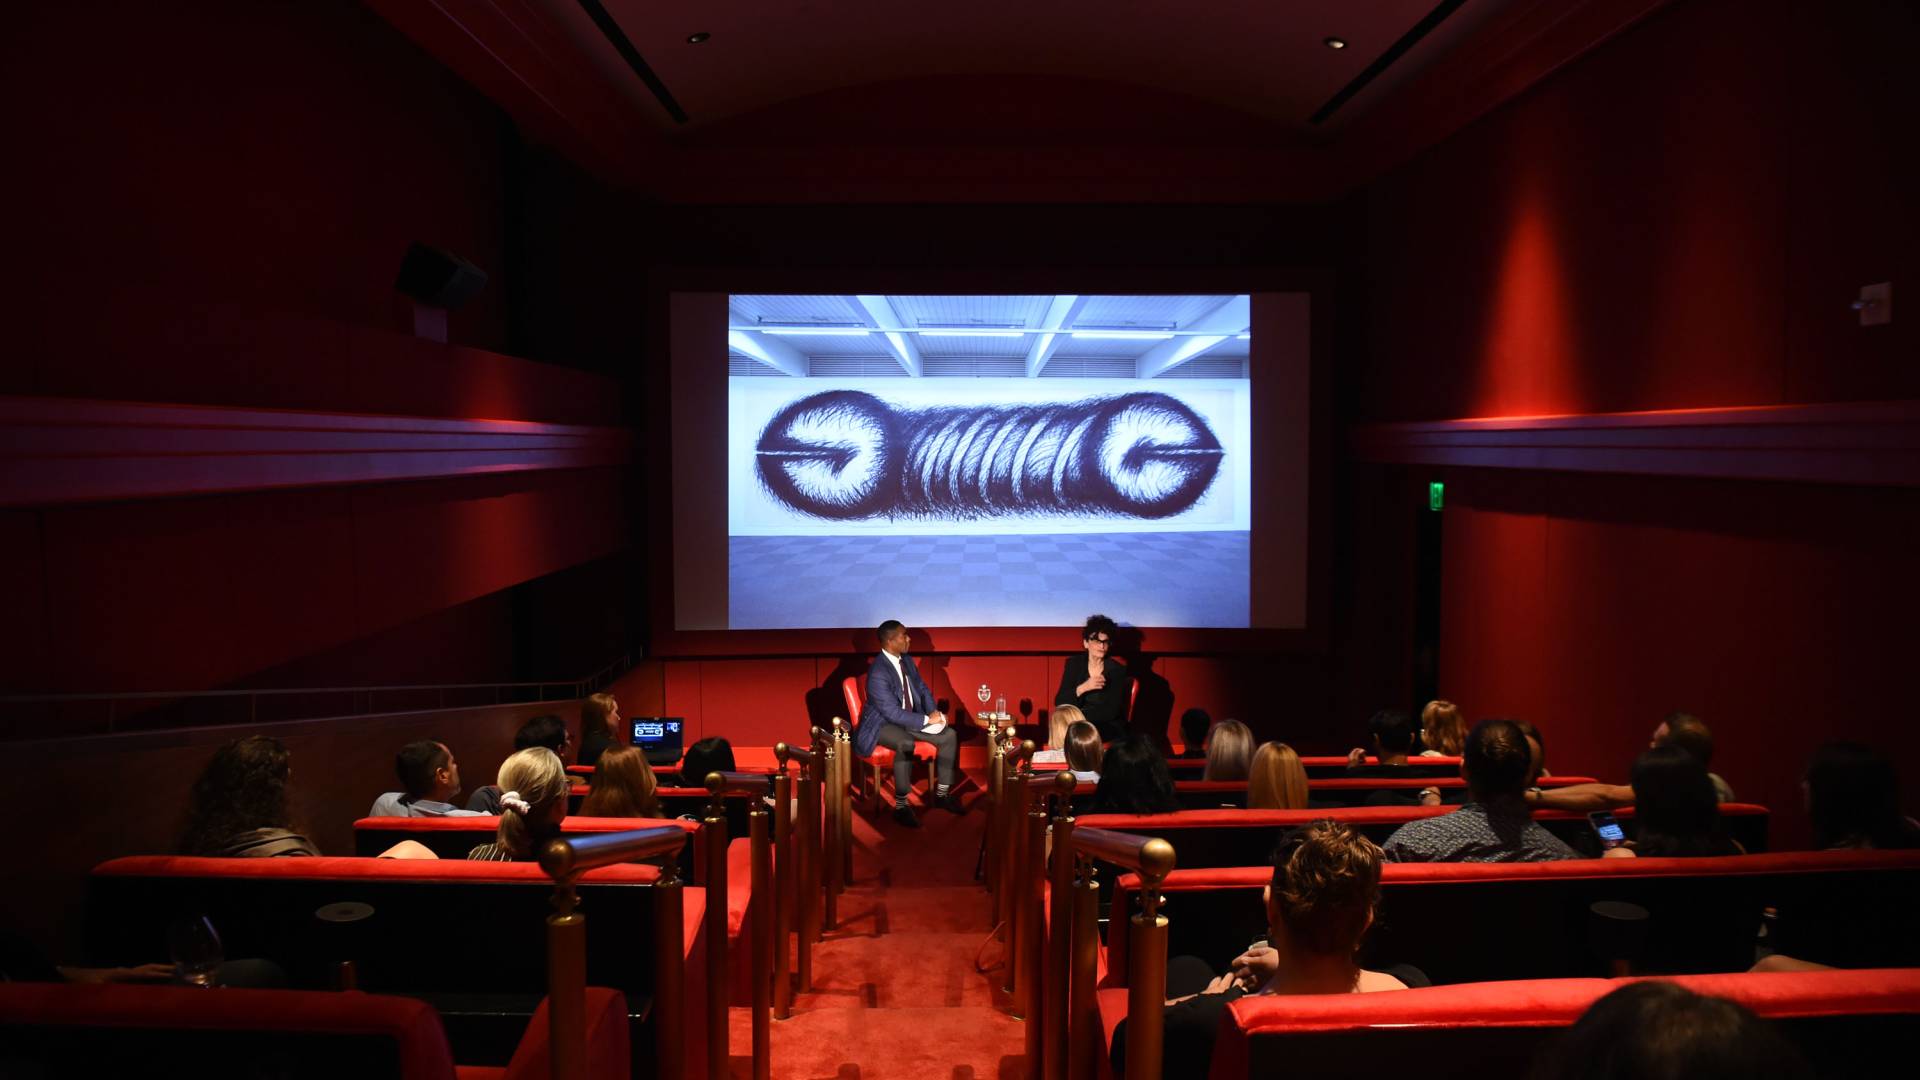 interior shot of performance in screening room with people in seats and projection on screen